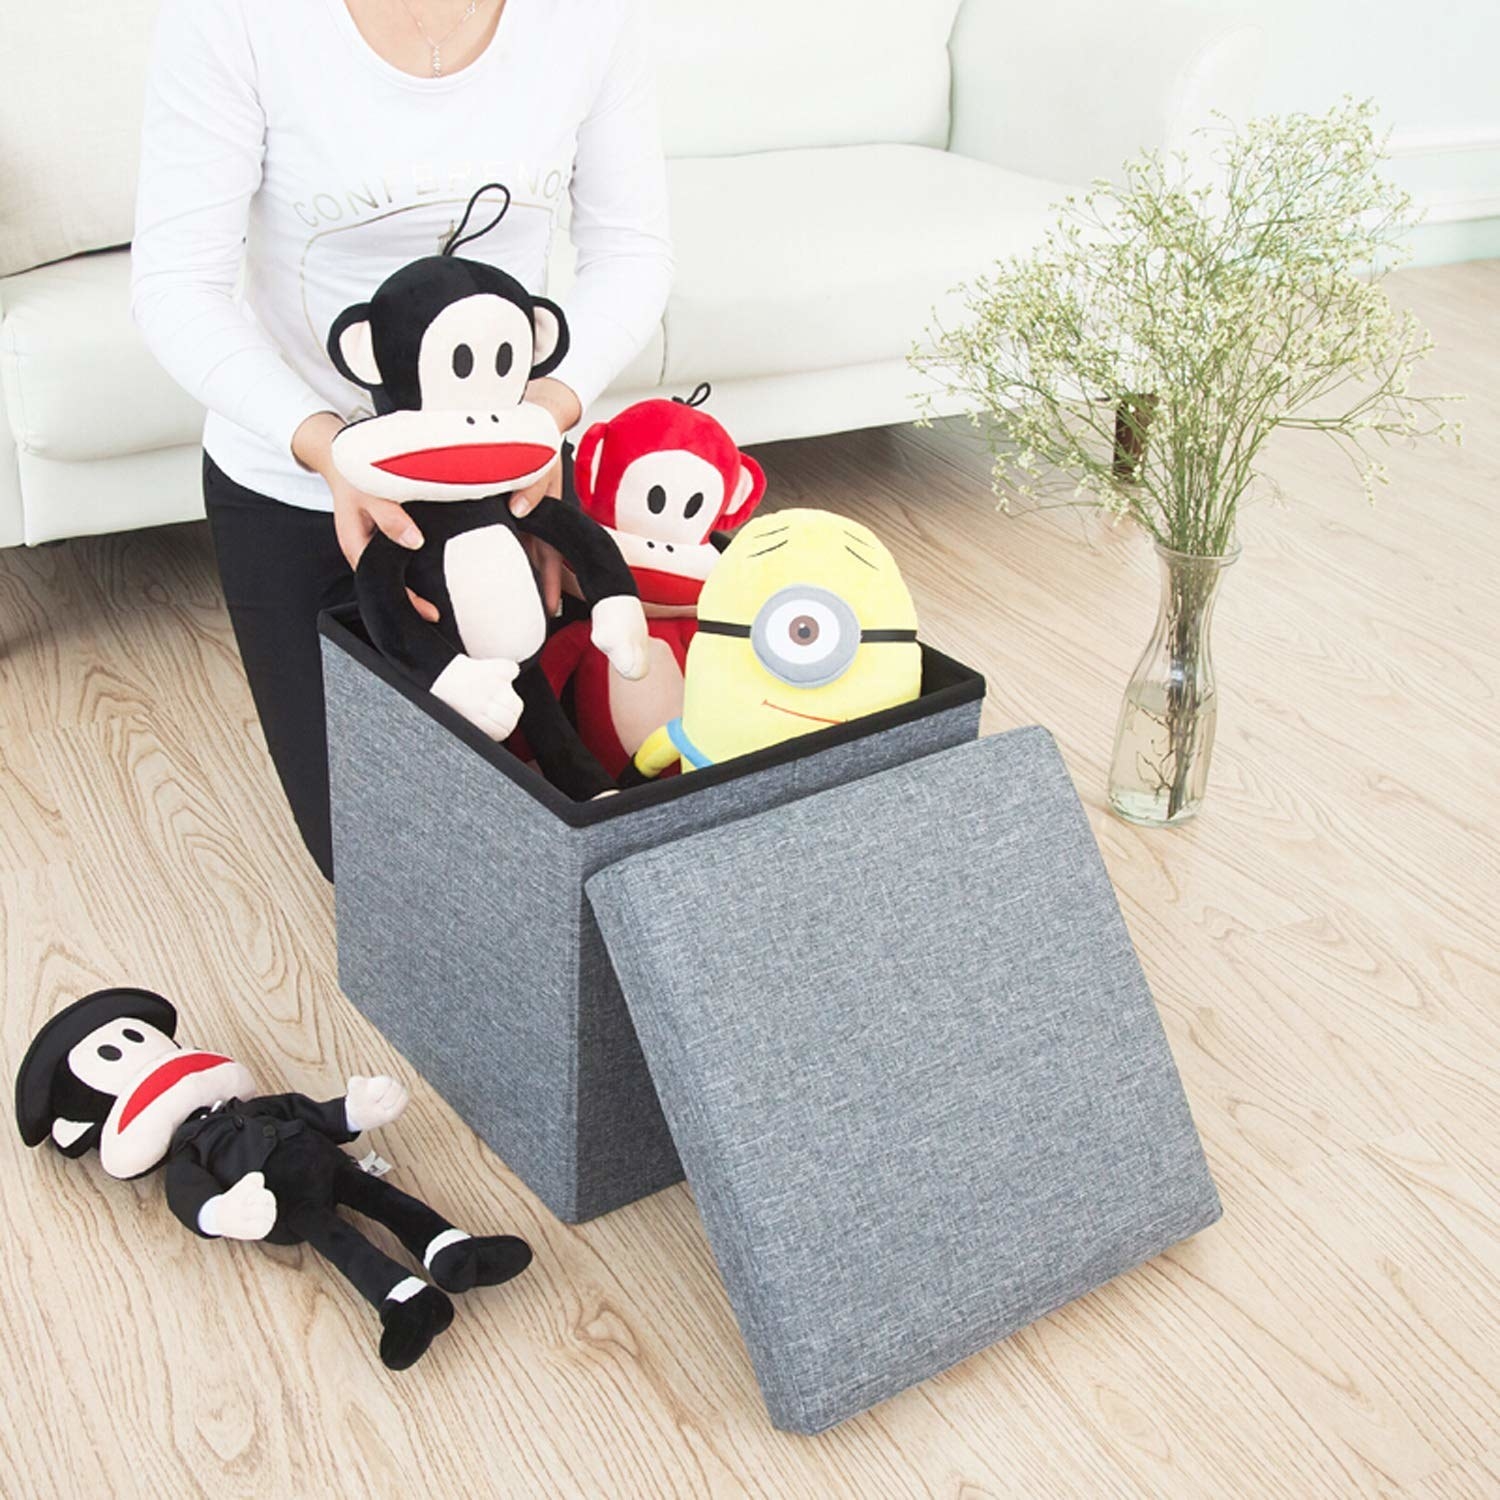 A person putting toys inside the ottoman